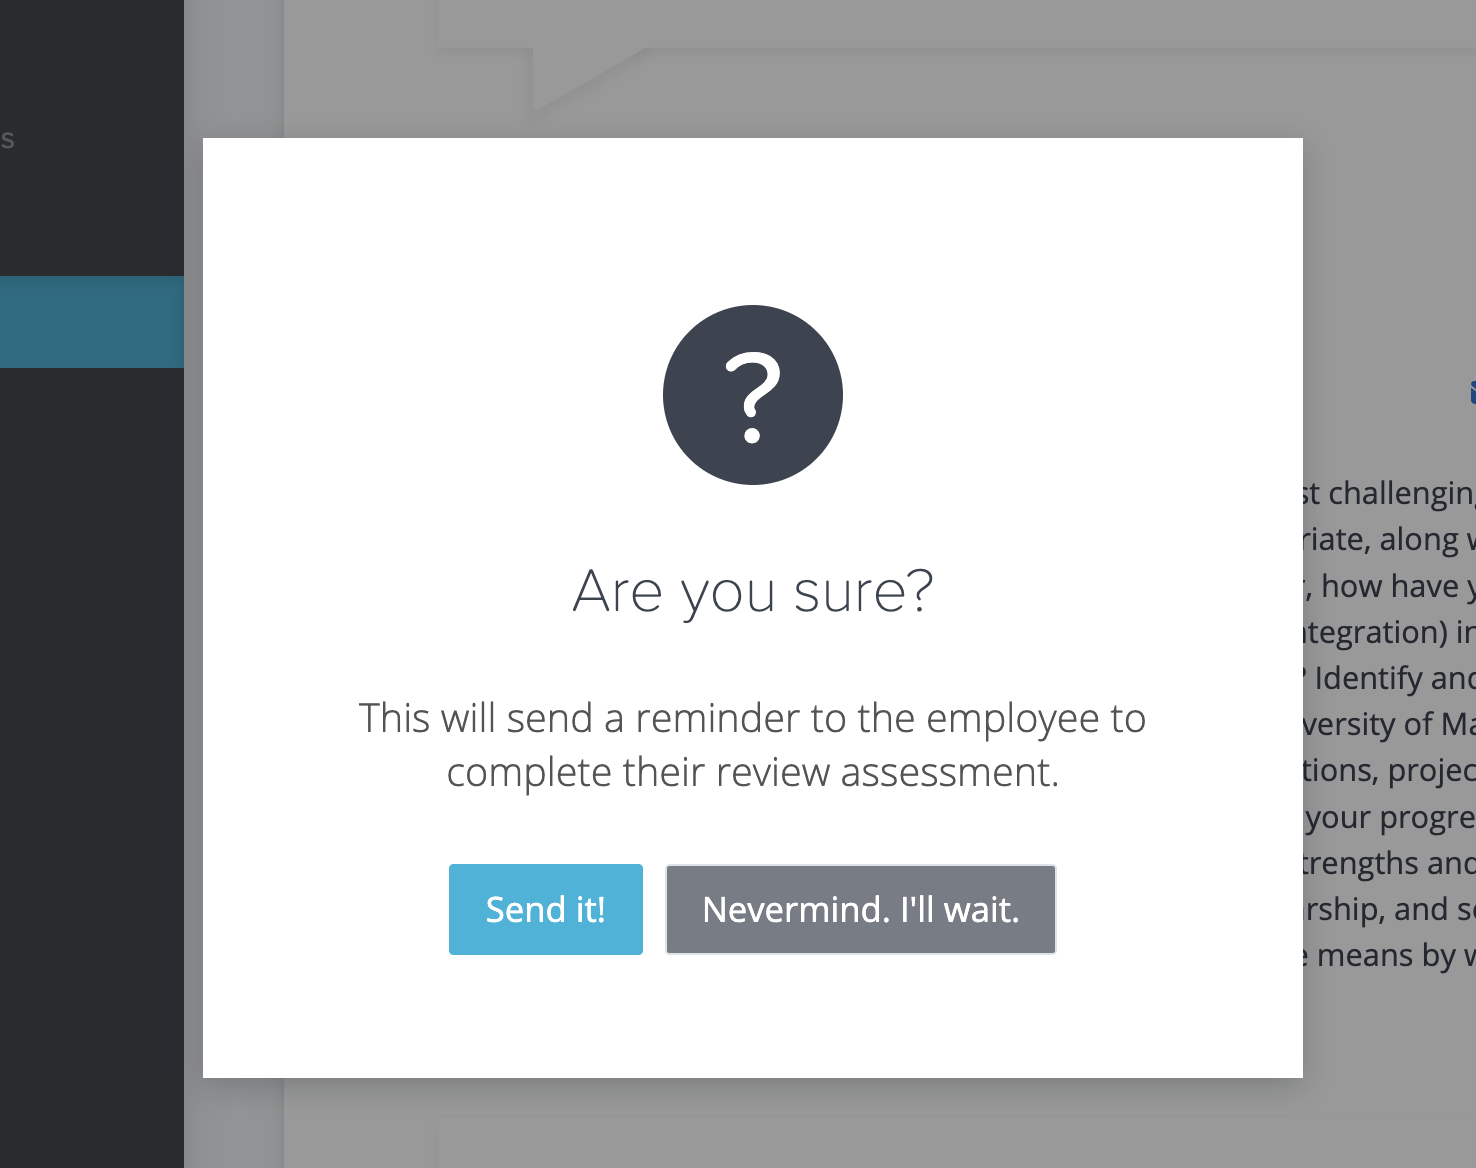 We now offer confirmation when a user reminds an employee to fill out their Employee Assessment